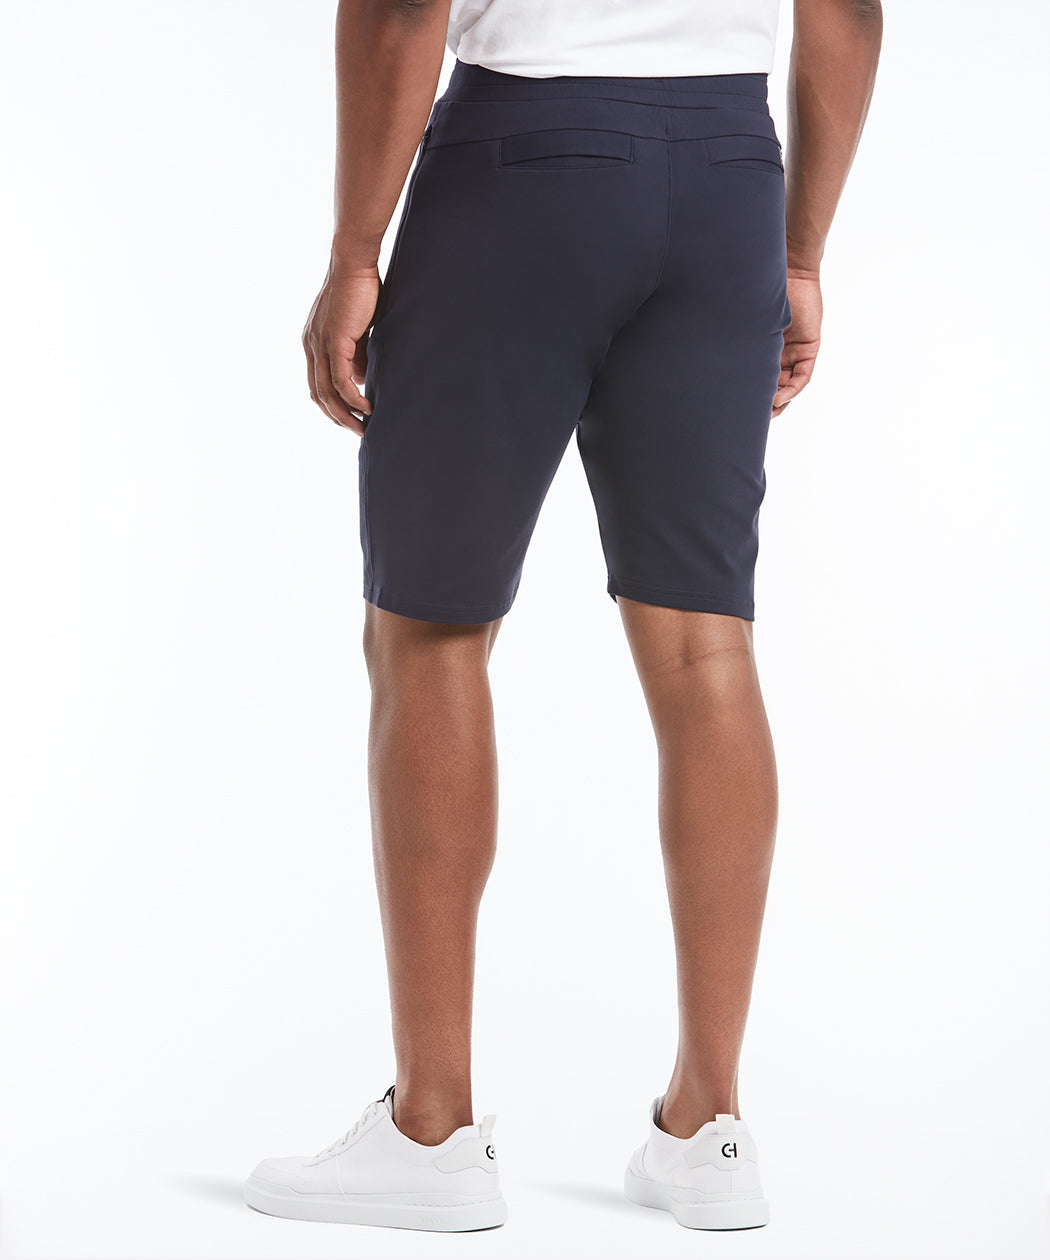 All Day Every Day Short 9" - Unlined